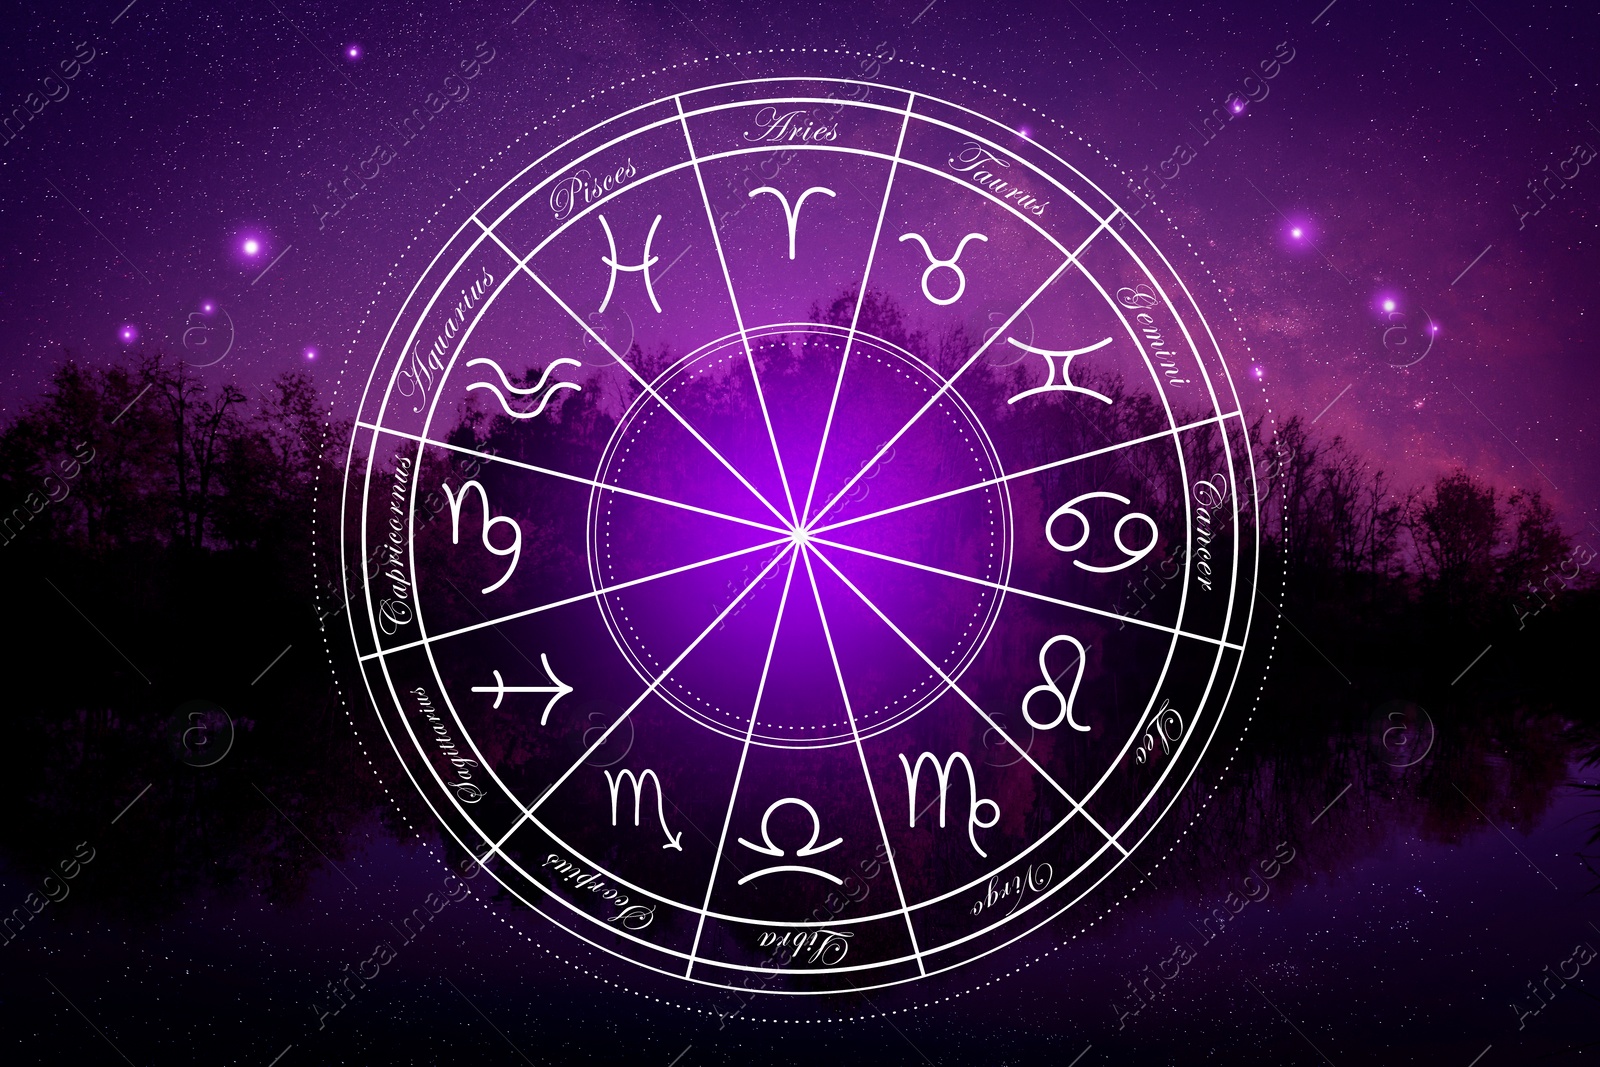 Image of Zodiac wheel showing 12 signs against night landscape